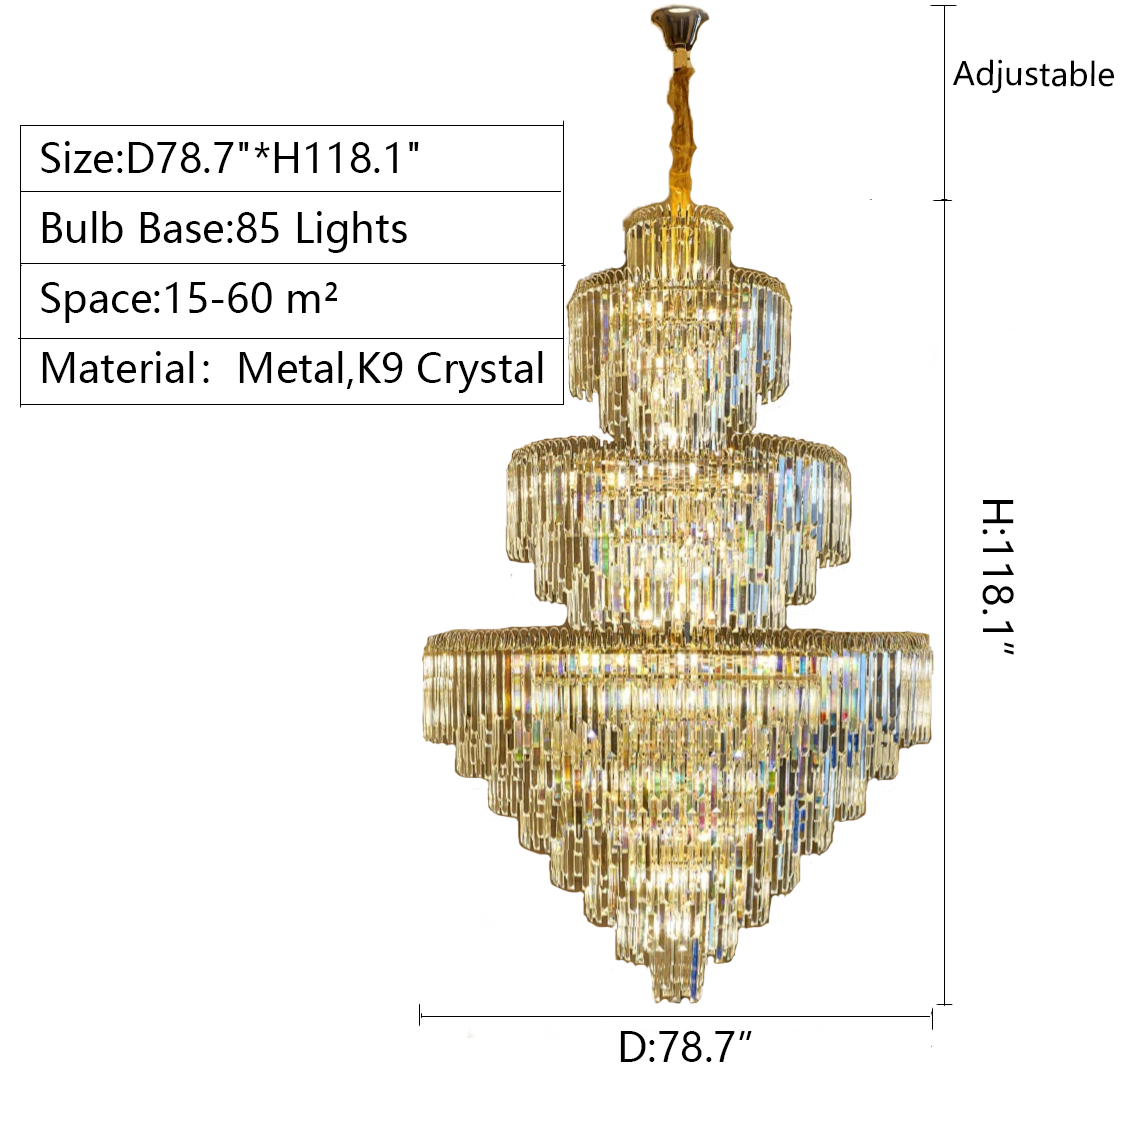 3 Layers Extra Large Living Room Chandelier Luxury Foyer Entryway Crystal Light Fixture Chandeliers Kevinstudiolives D78.7"*H118.1"/ 85 Lights Warm Light 